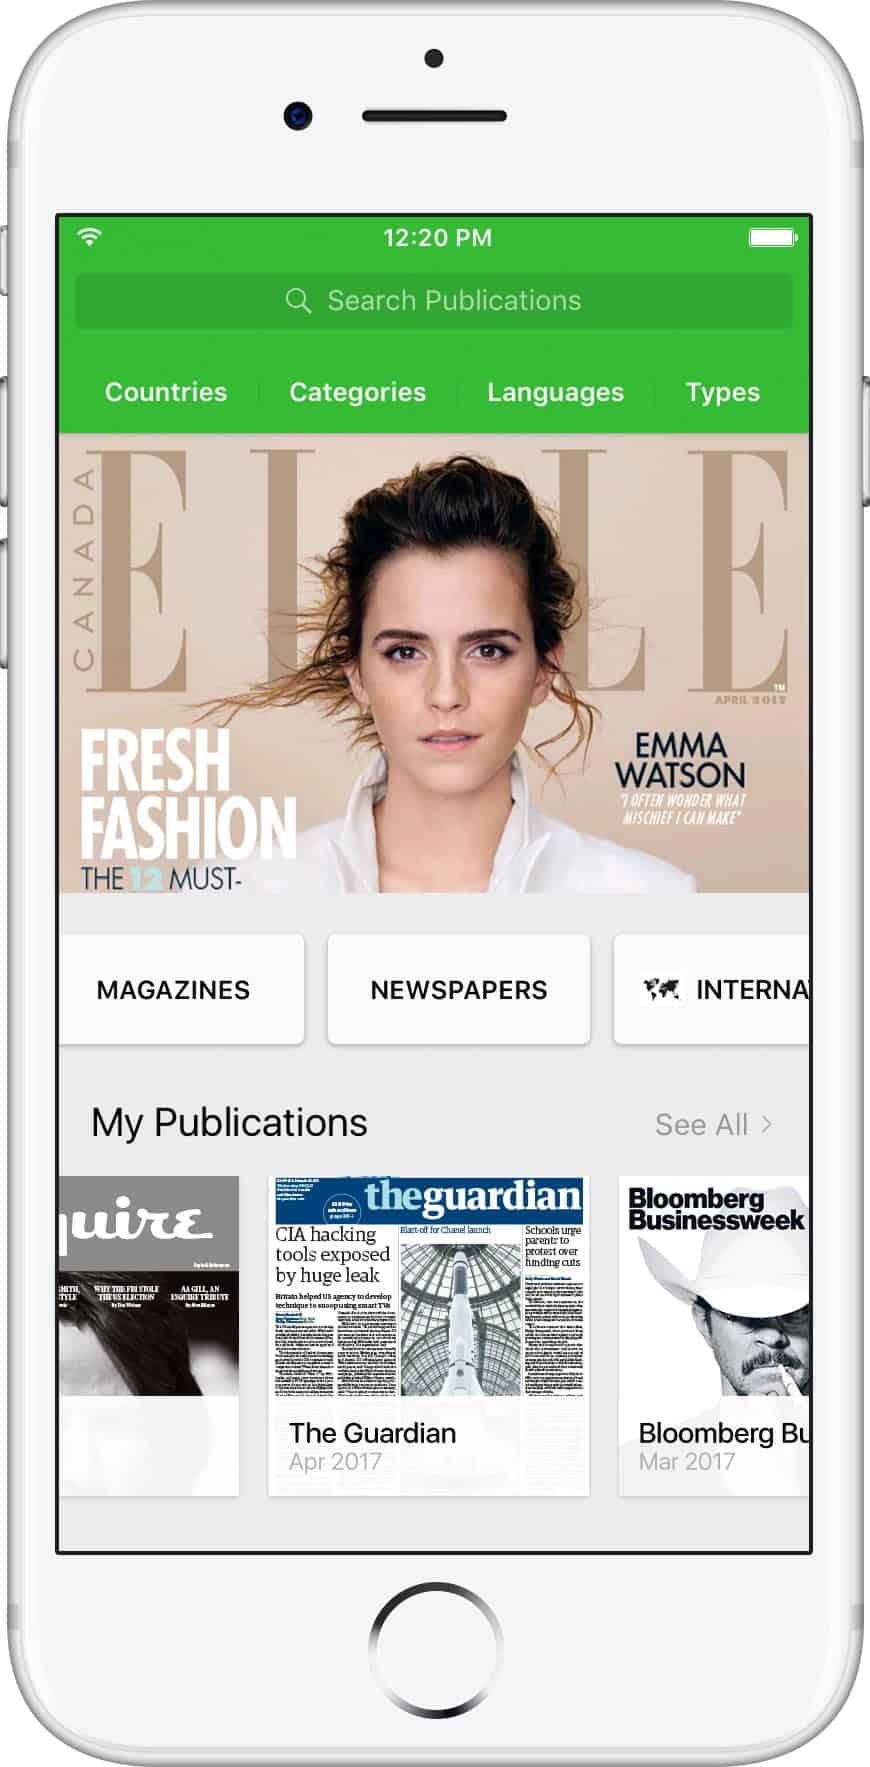 An image of the PressReader app displayed on an iPhone showing the cover of Elle magazine, featuring Emma Watson.